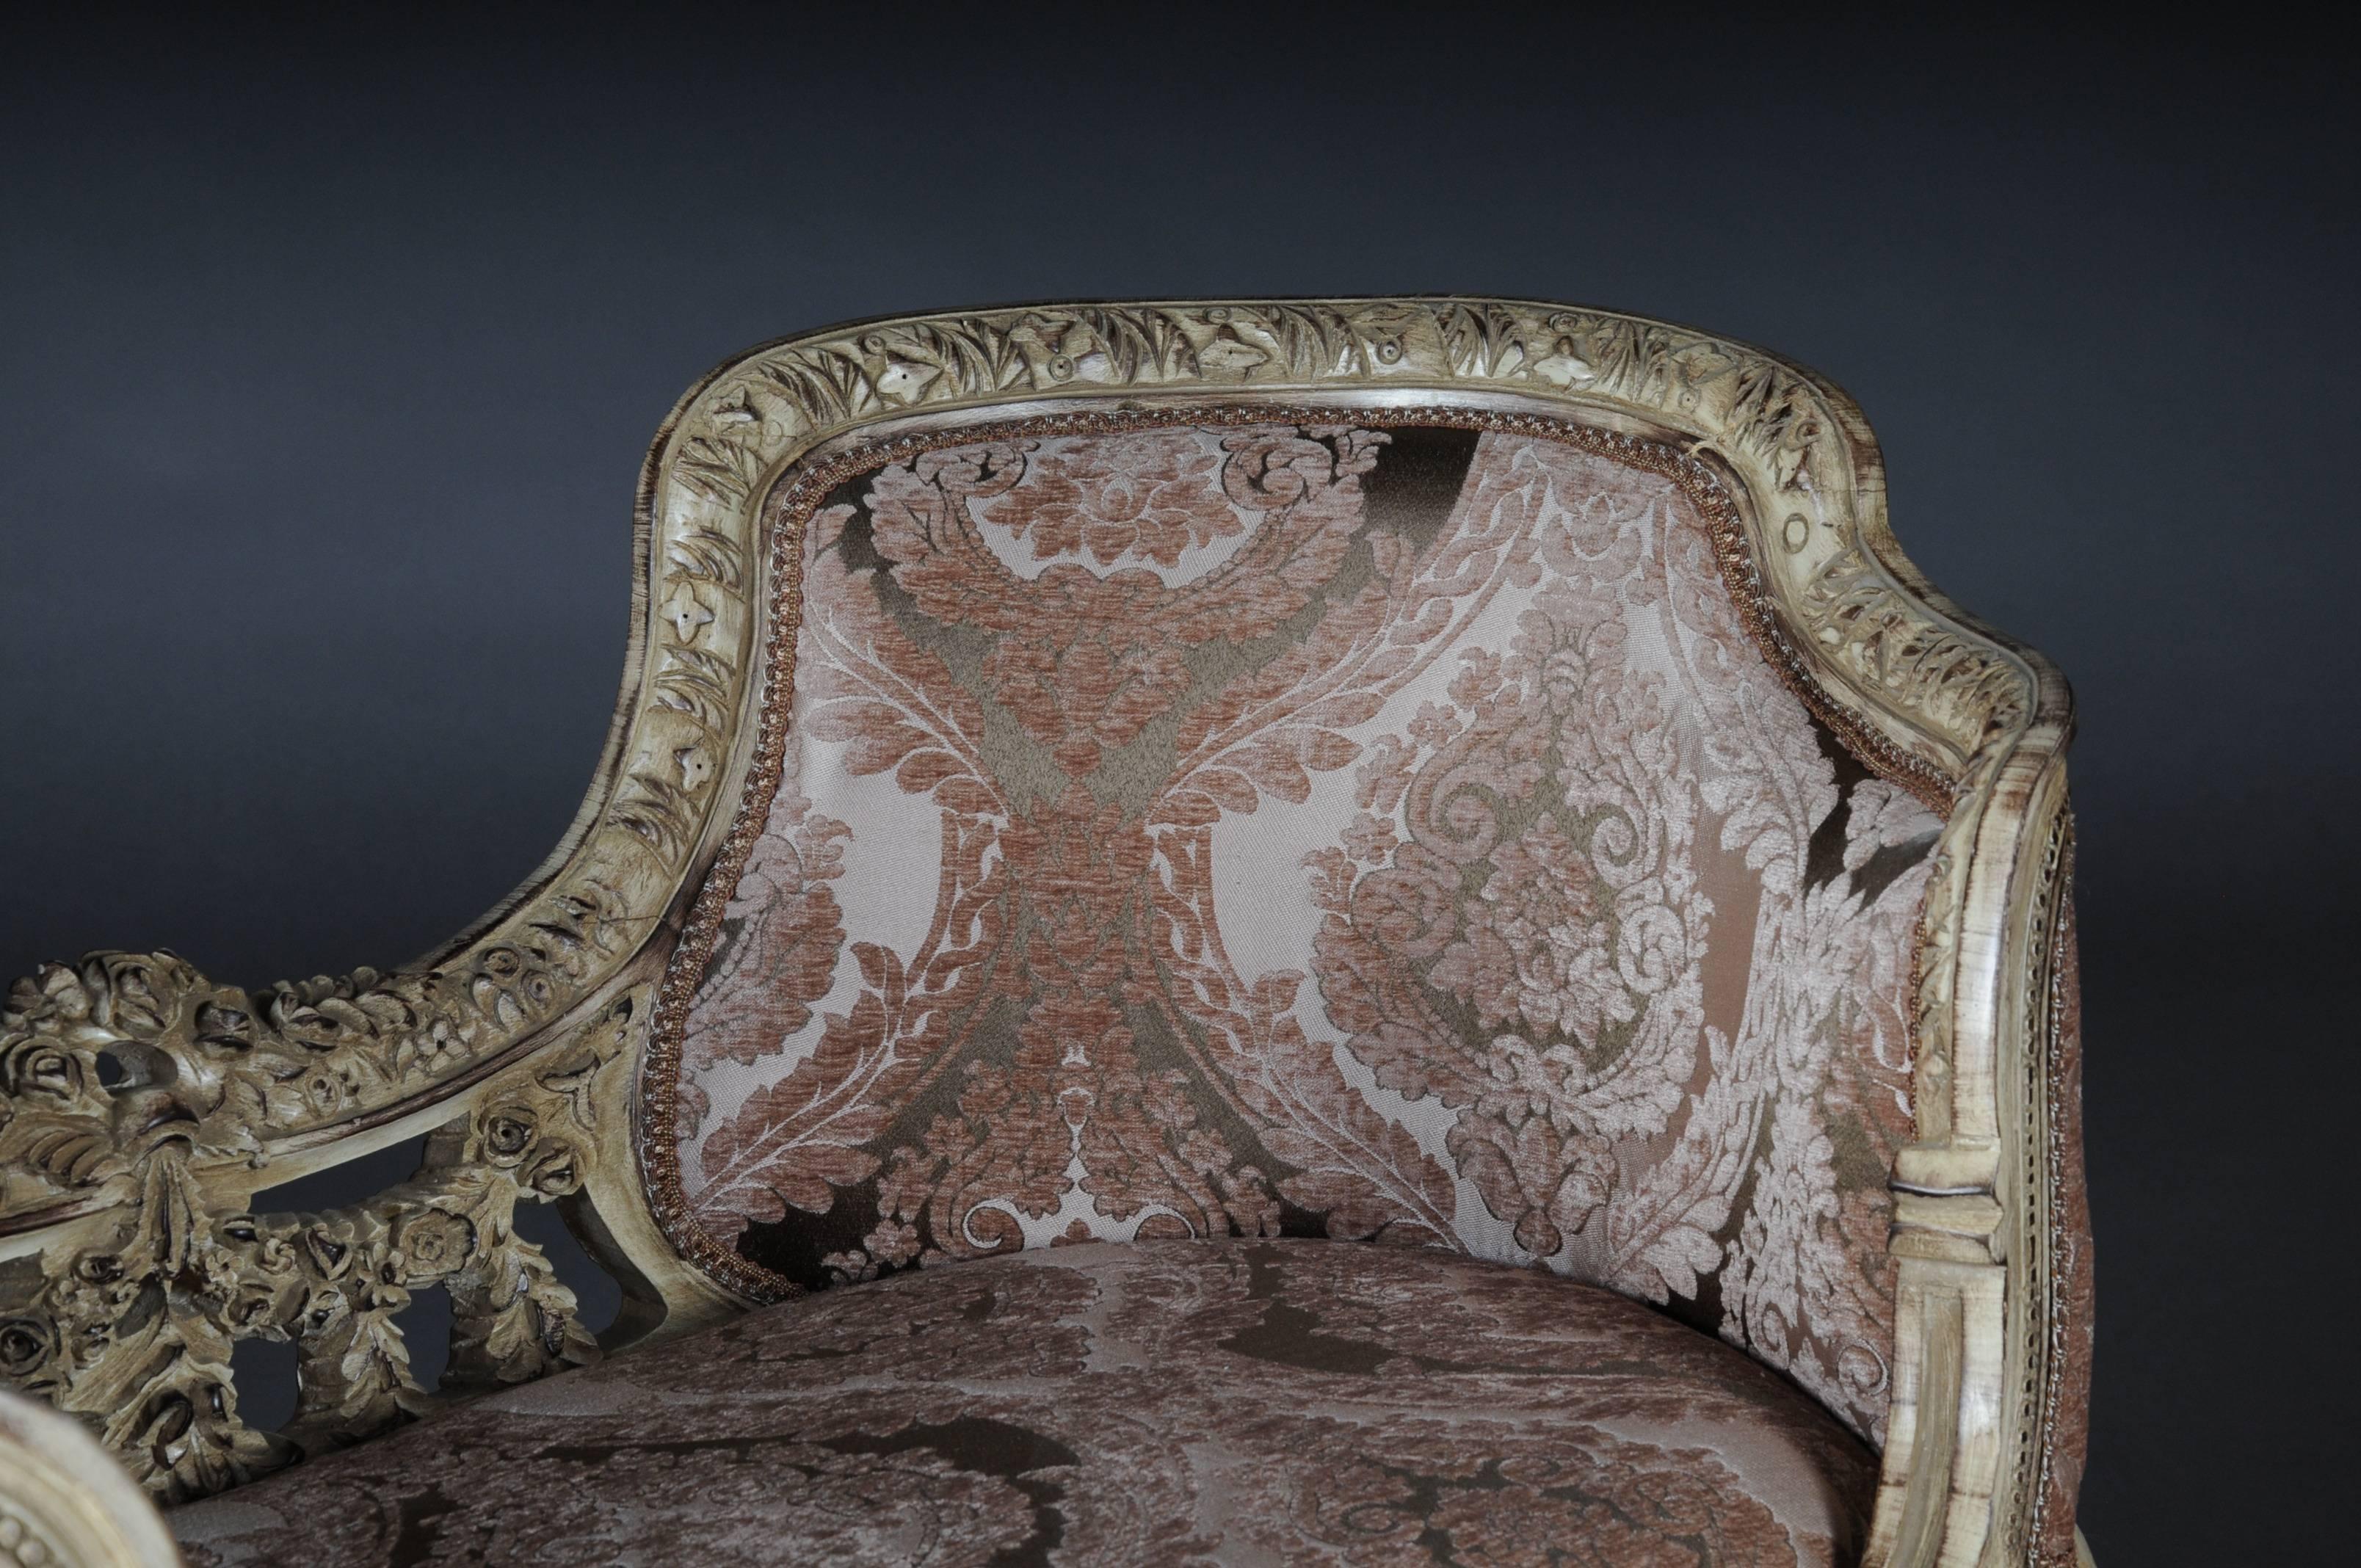 Upholstery Unique French Bench, Sofa in Louis Seize XVI